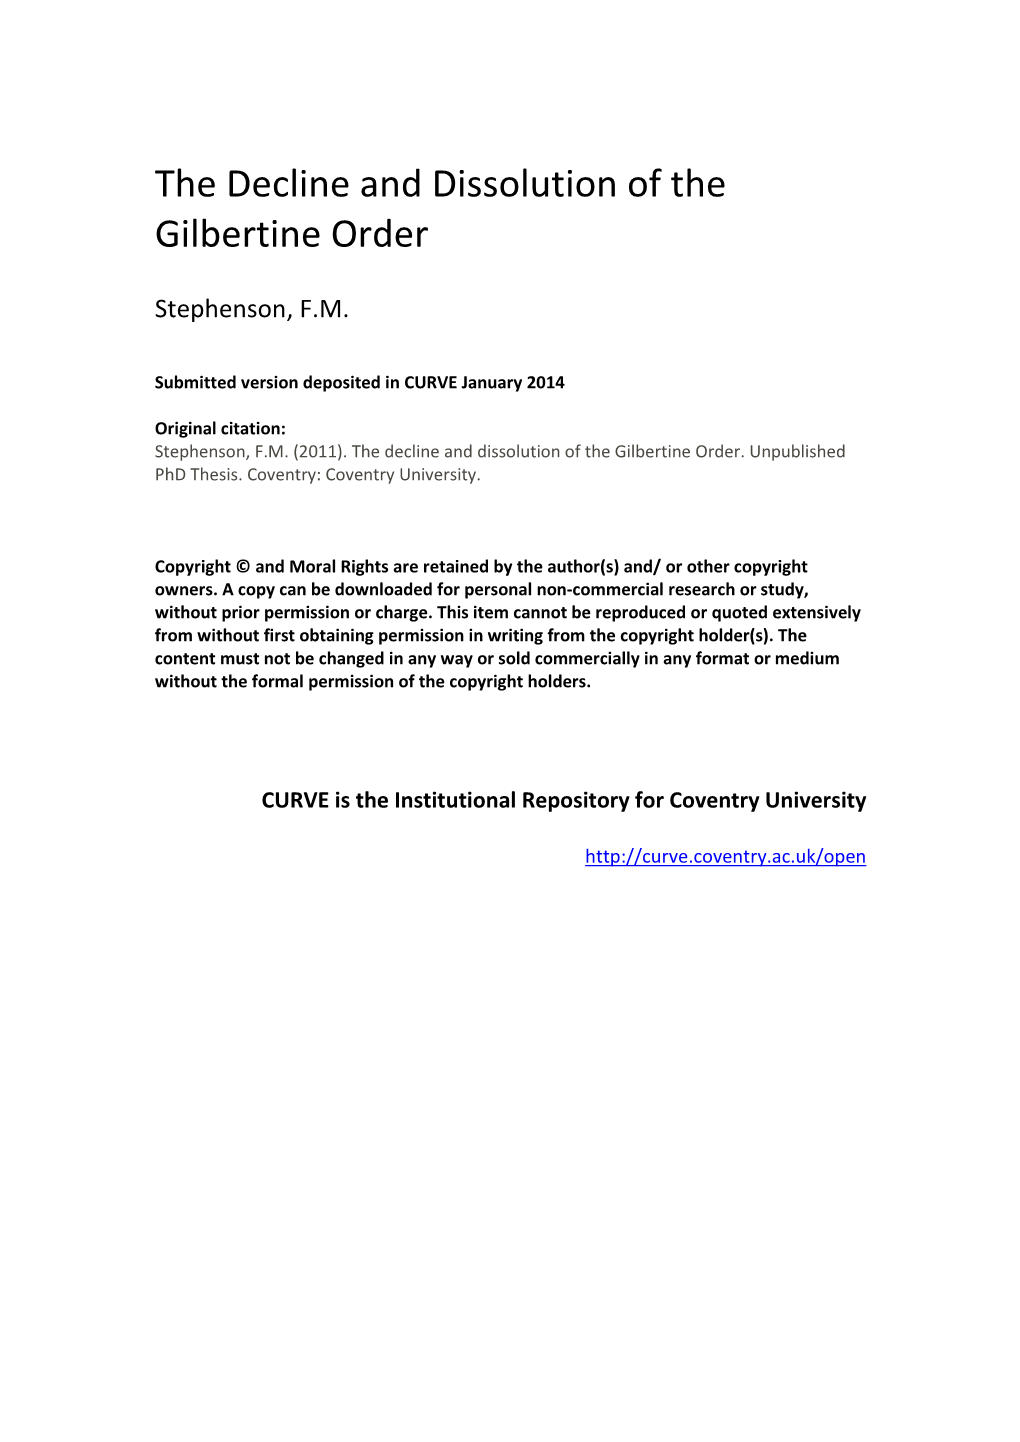 The Decline and Dissolution of the Gilbertine Order